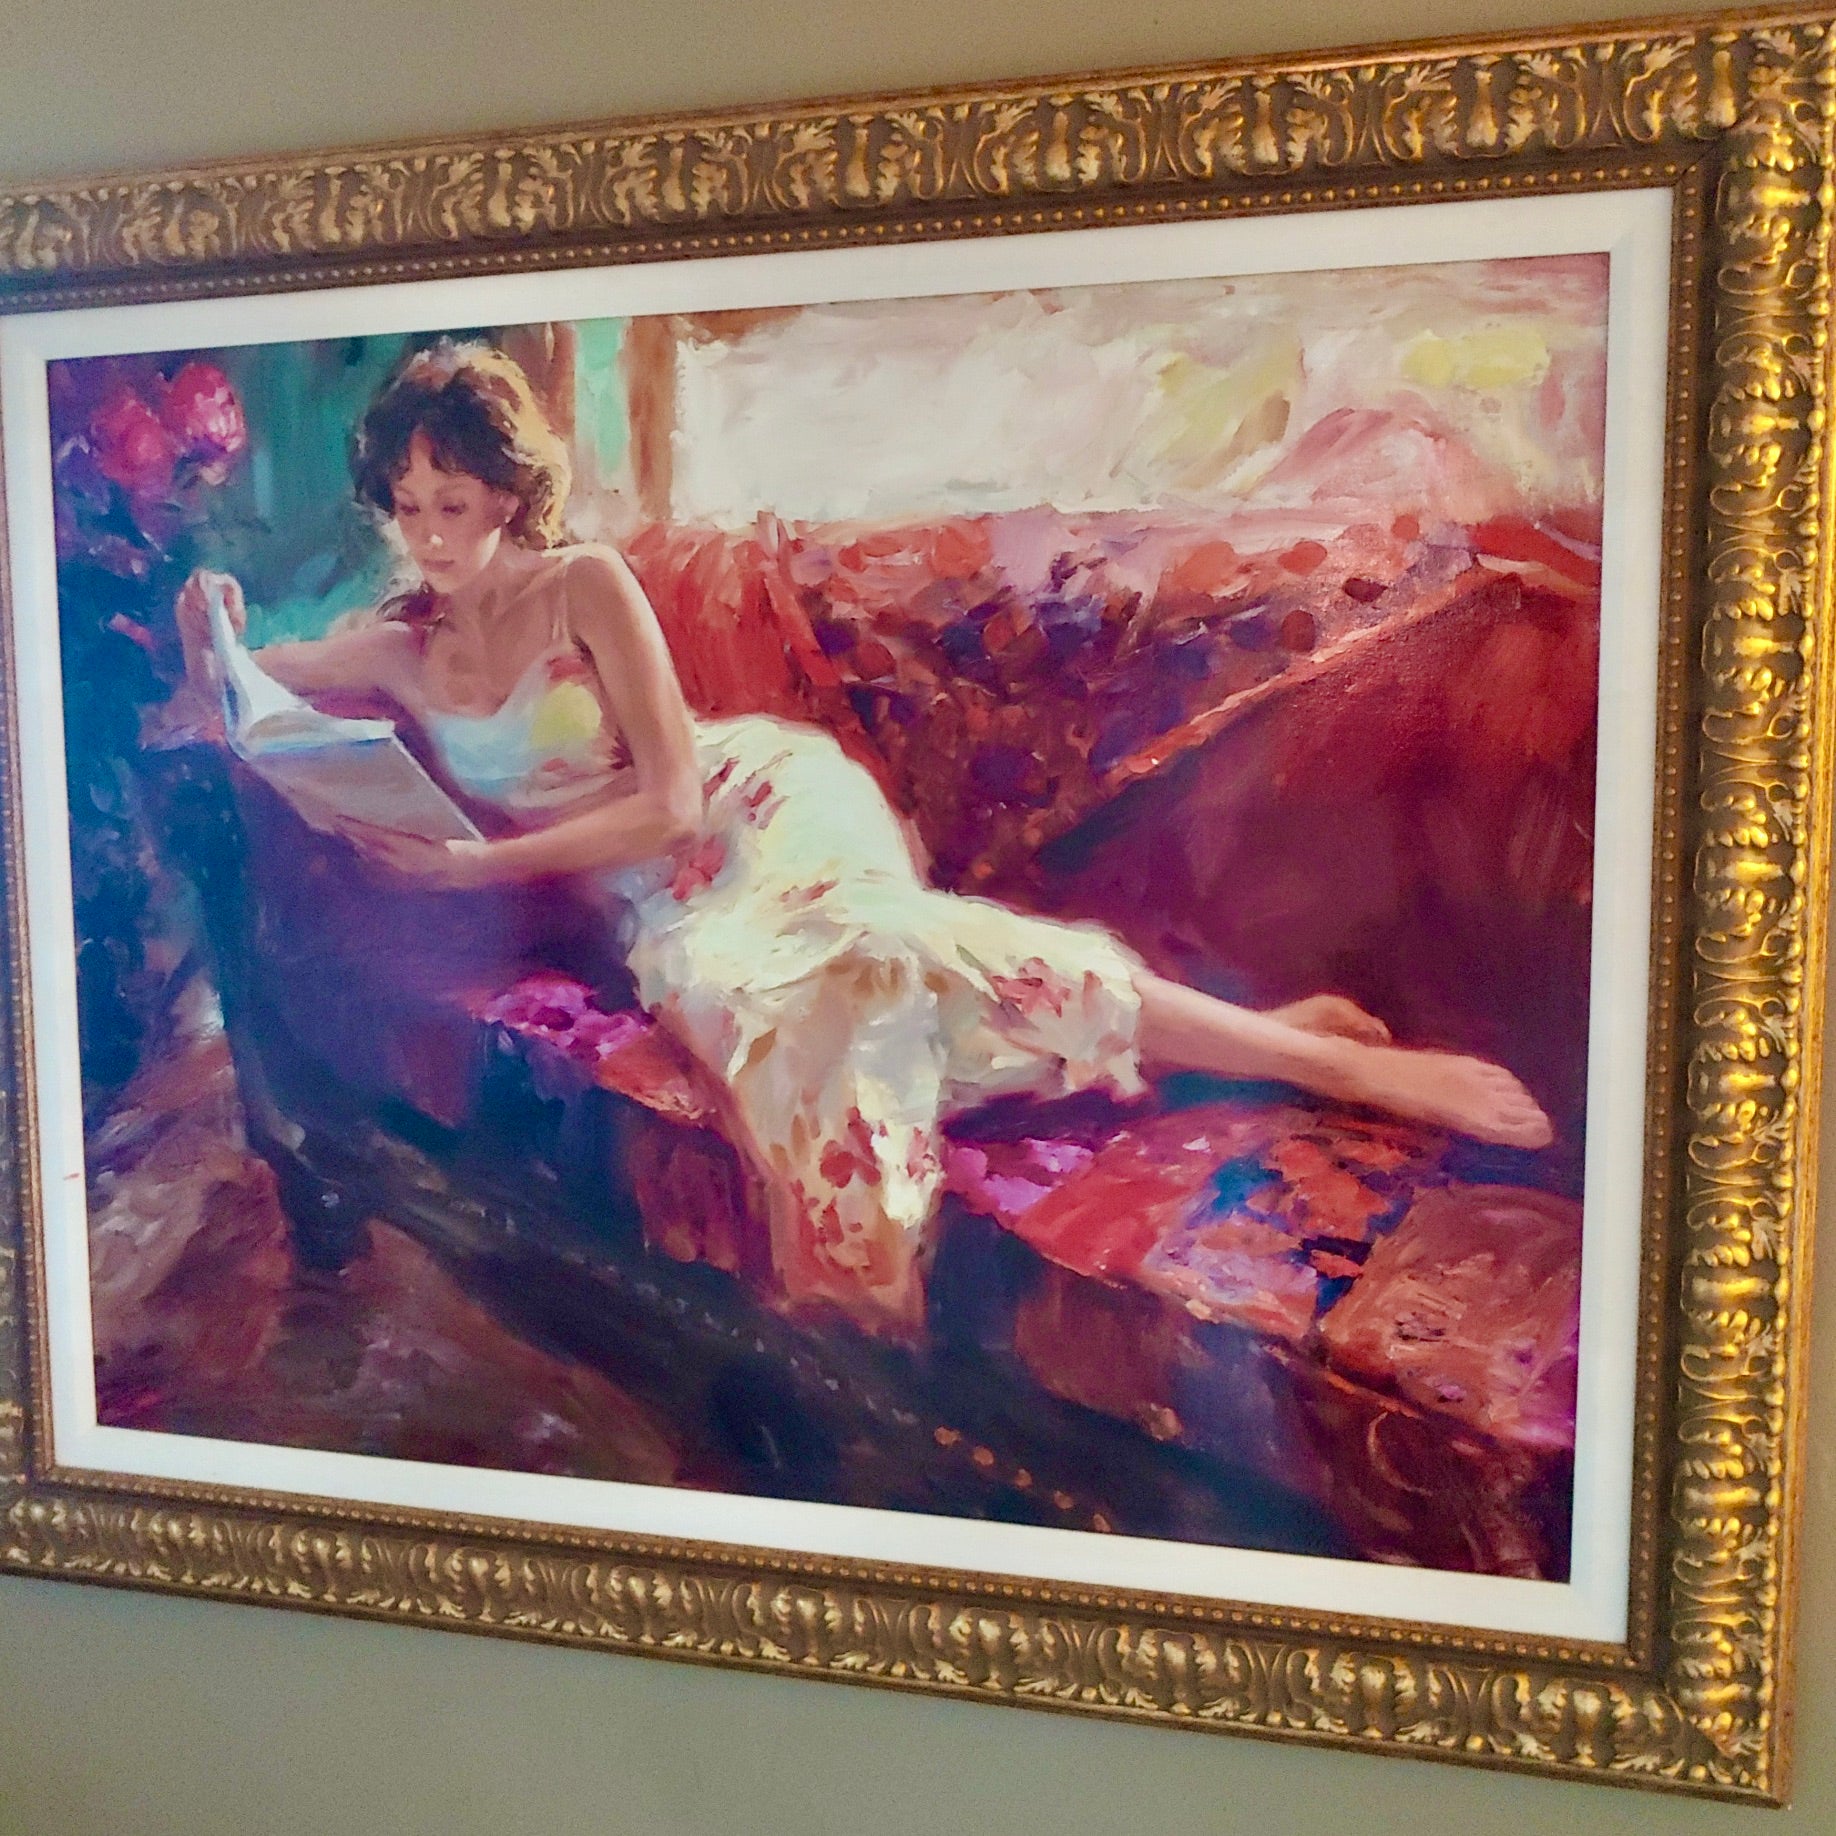 Framed, Signed and Numbered Giclee by Vladimir Vologov "The Red Couch"